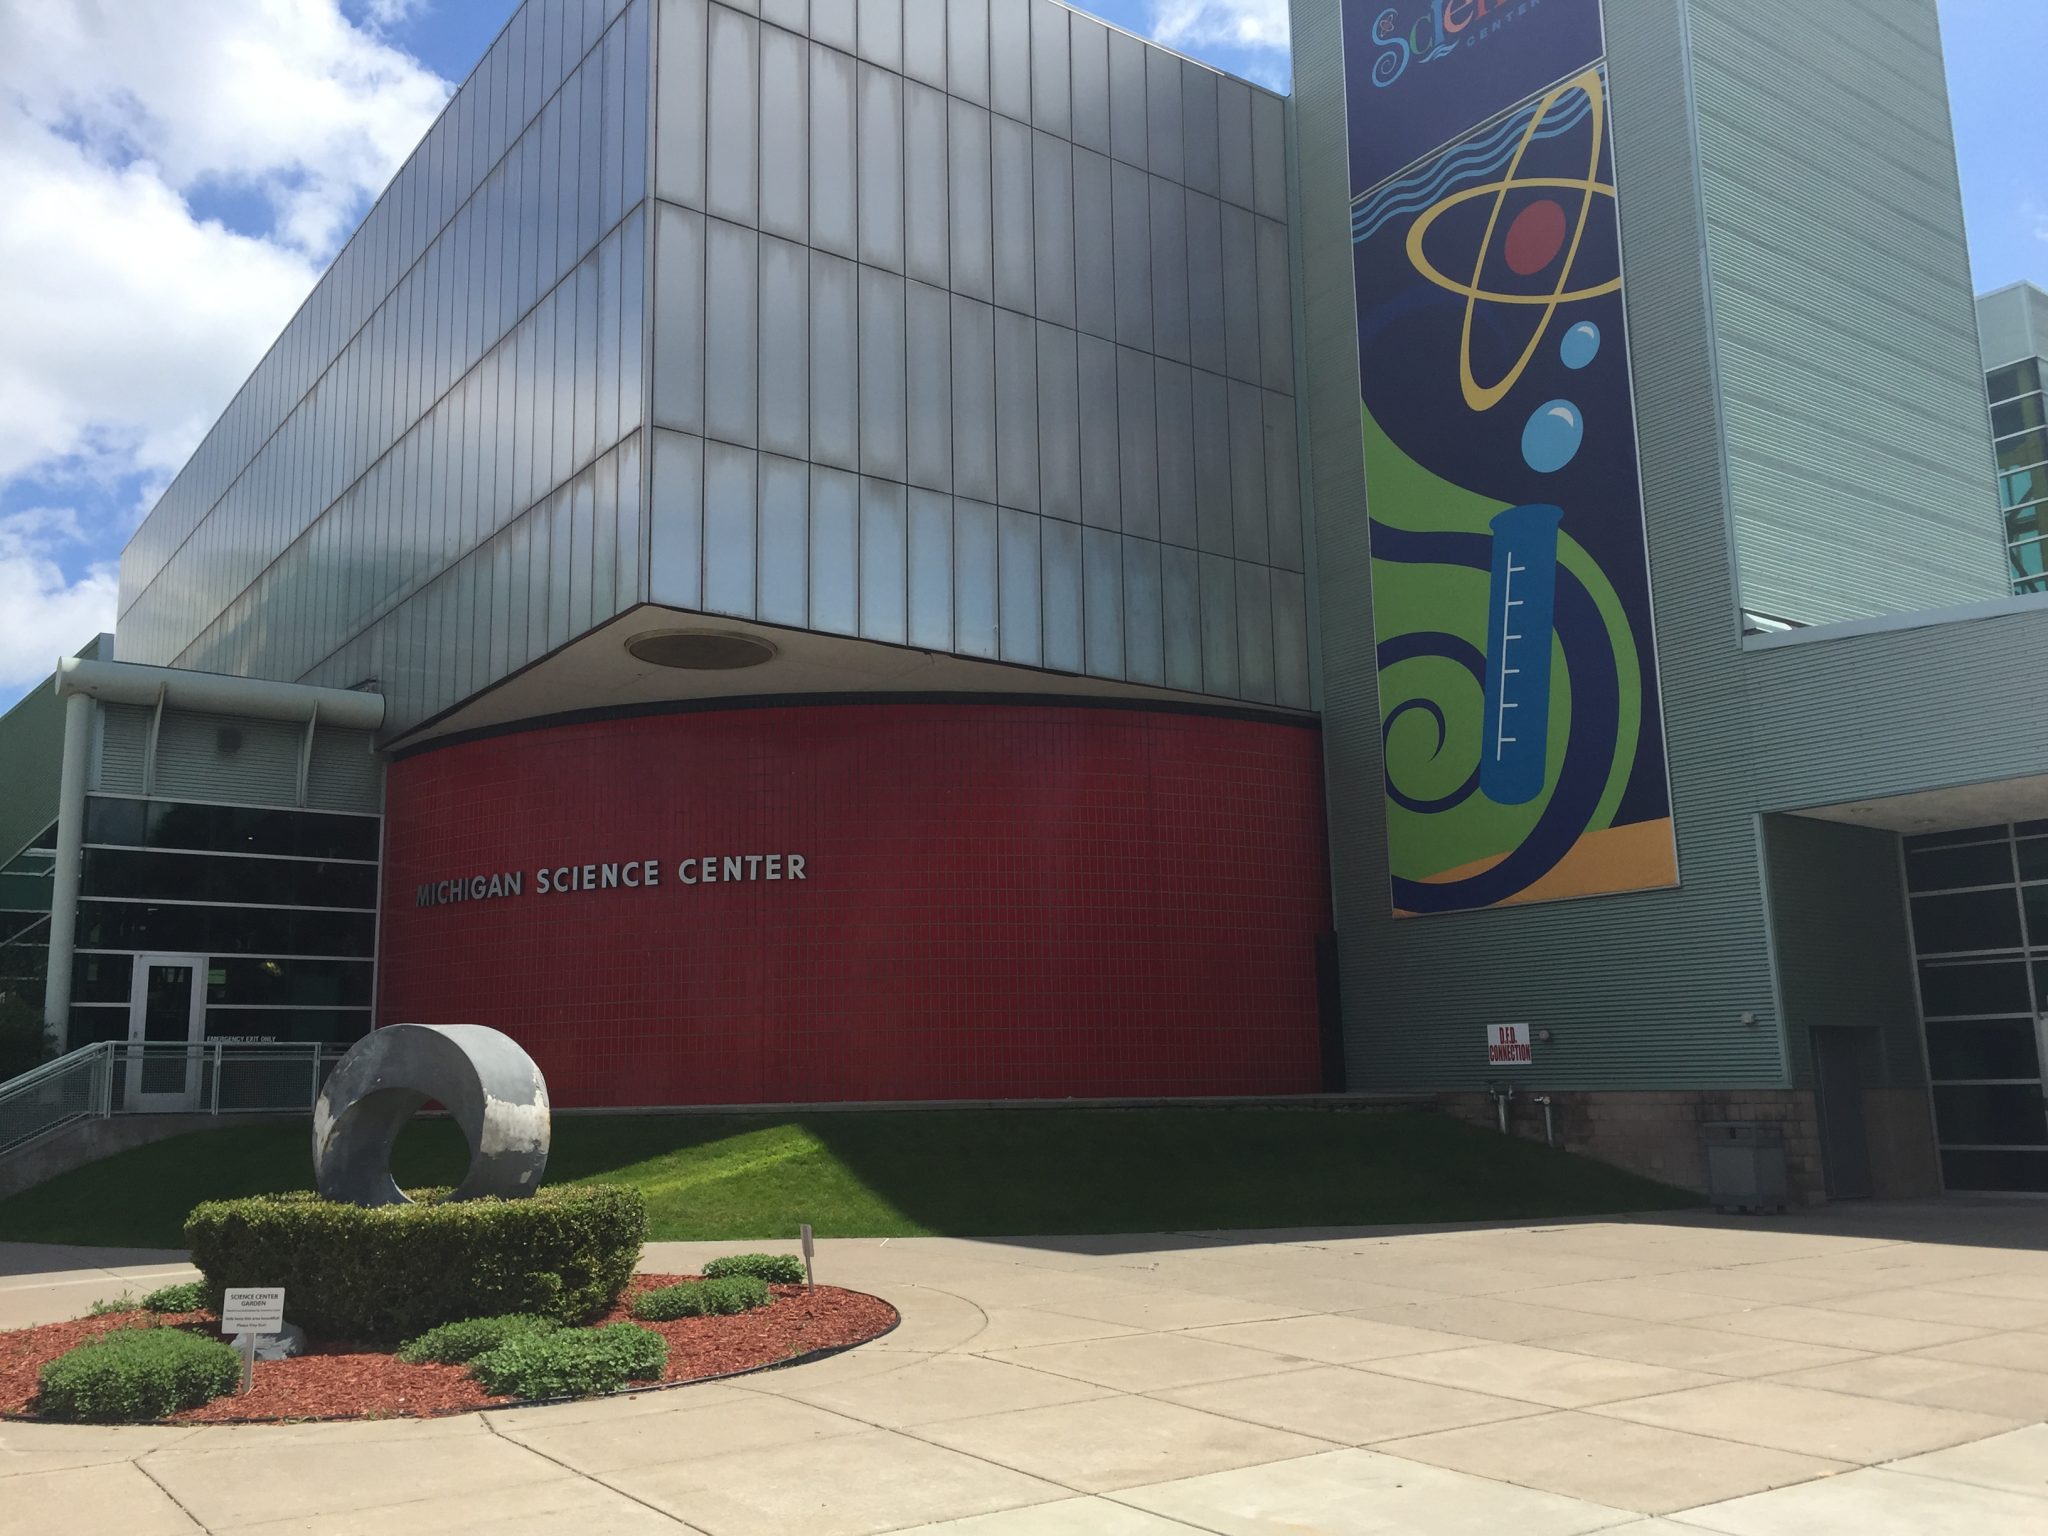 Exterior of the Michigan Science Center